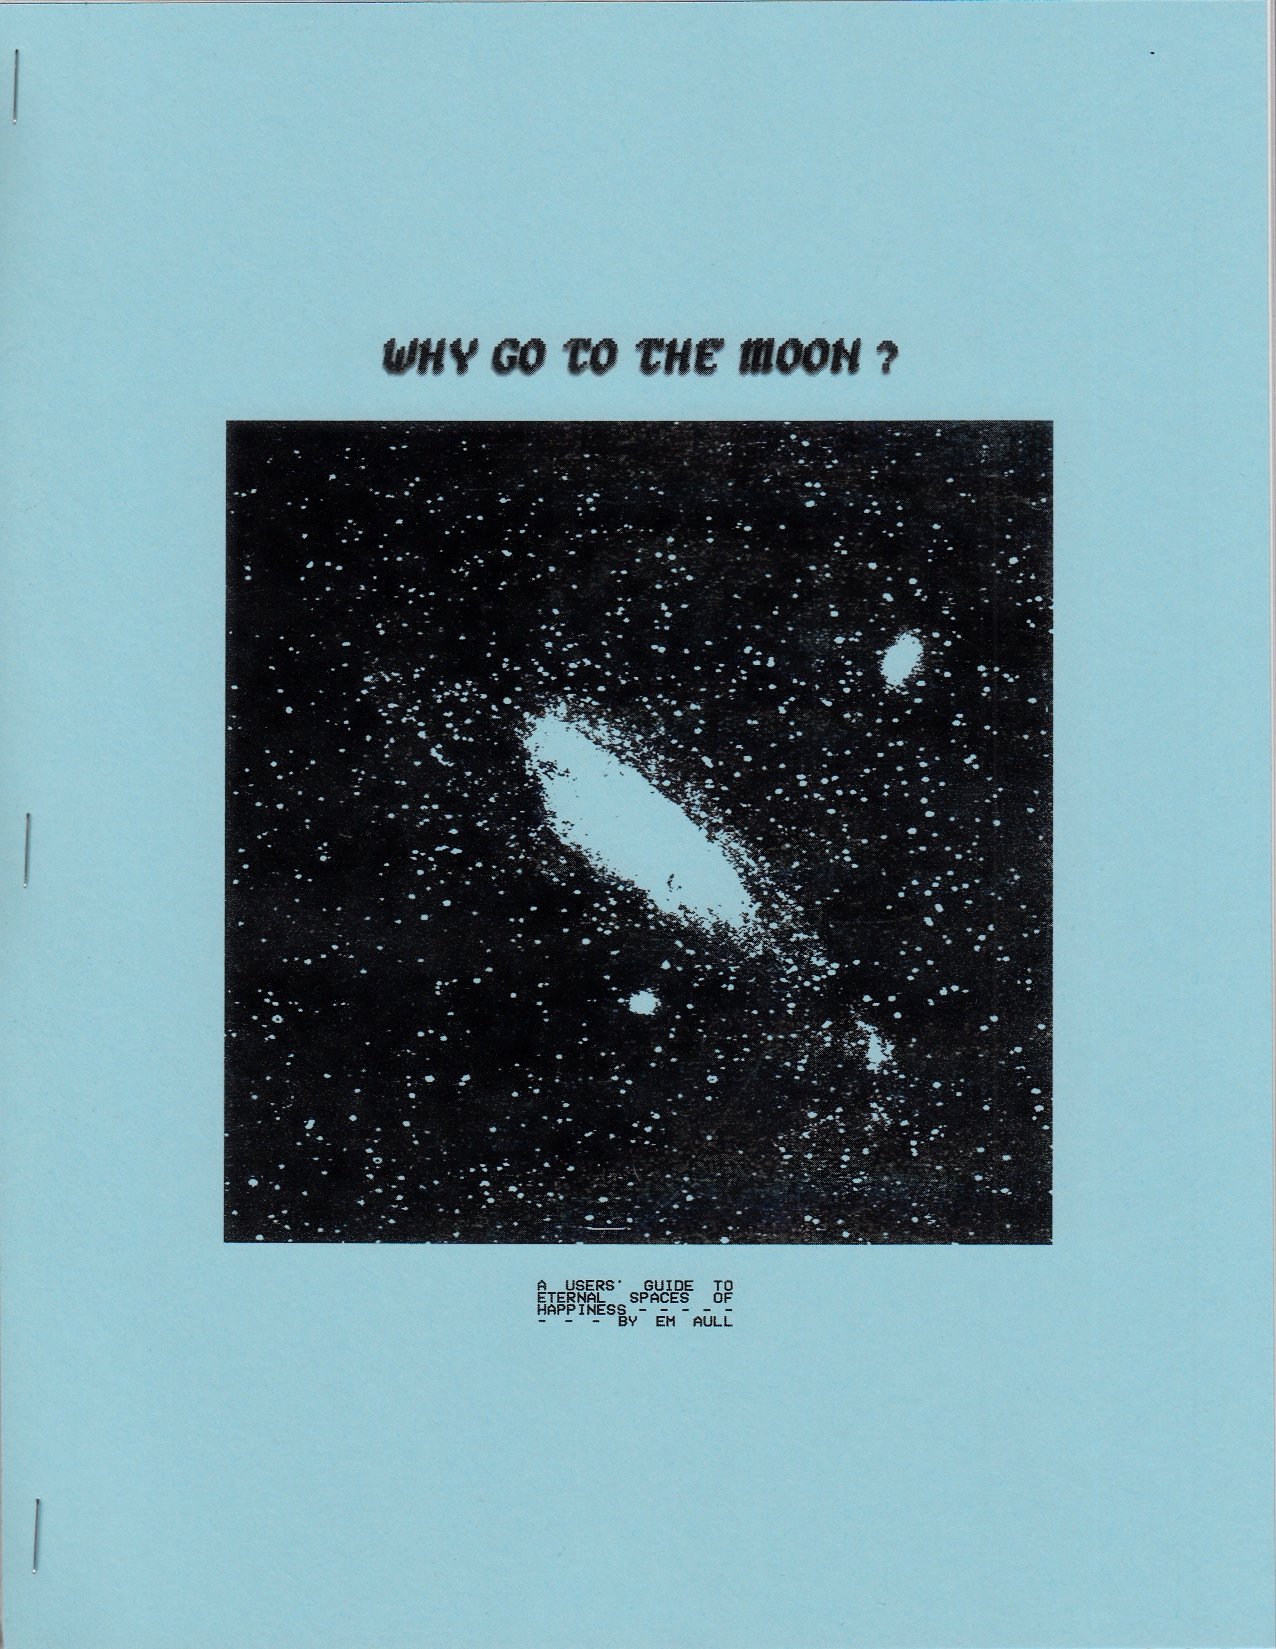 Image of Em Aull's Why Go To The Moon? Zine